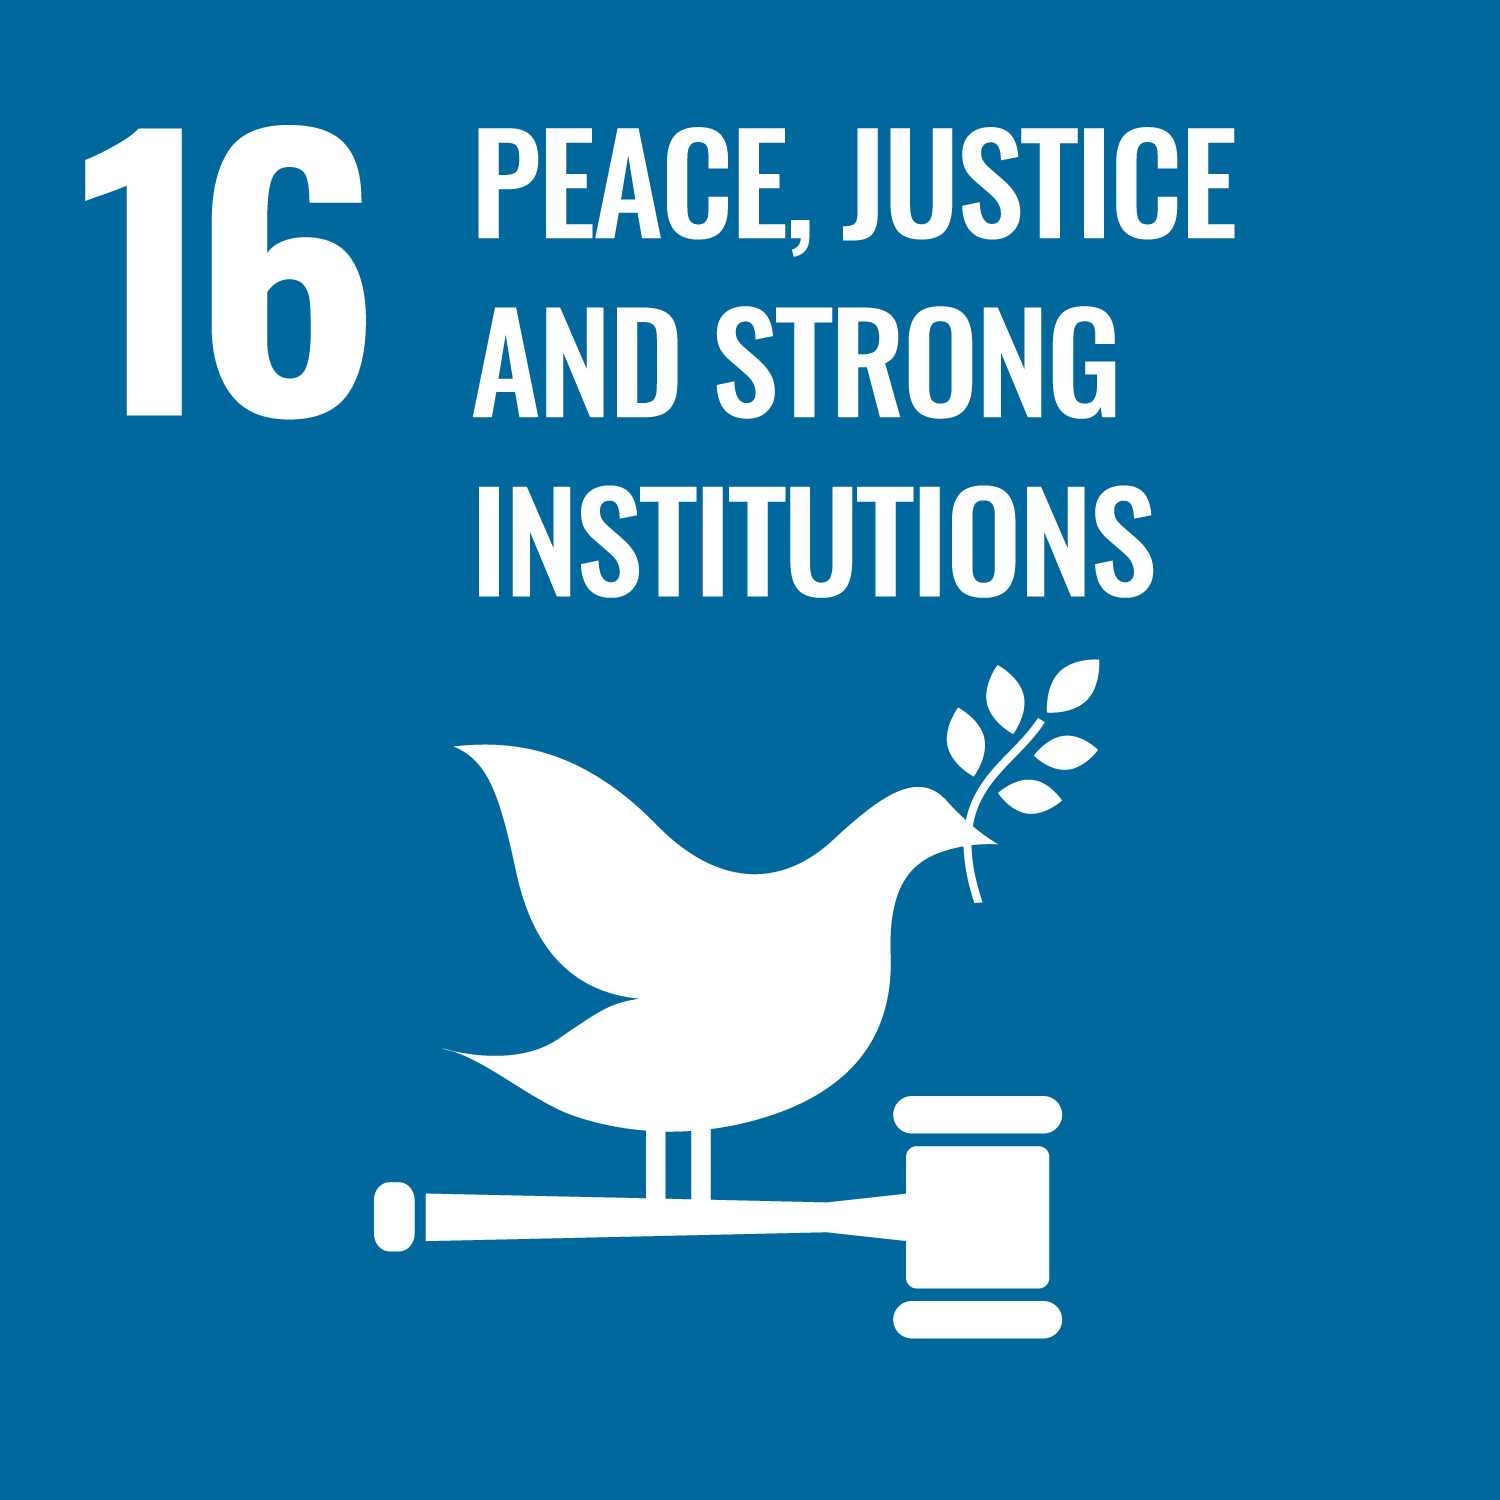 SDGs 16 Peace,Justice and Strong Institutions